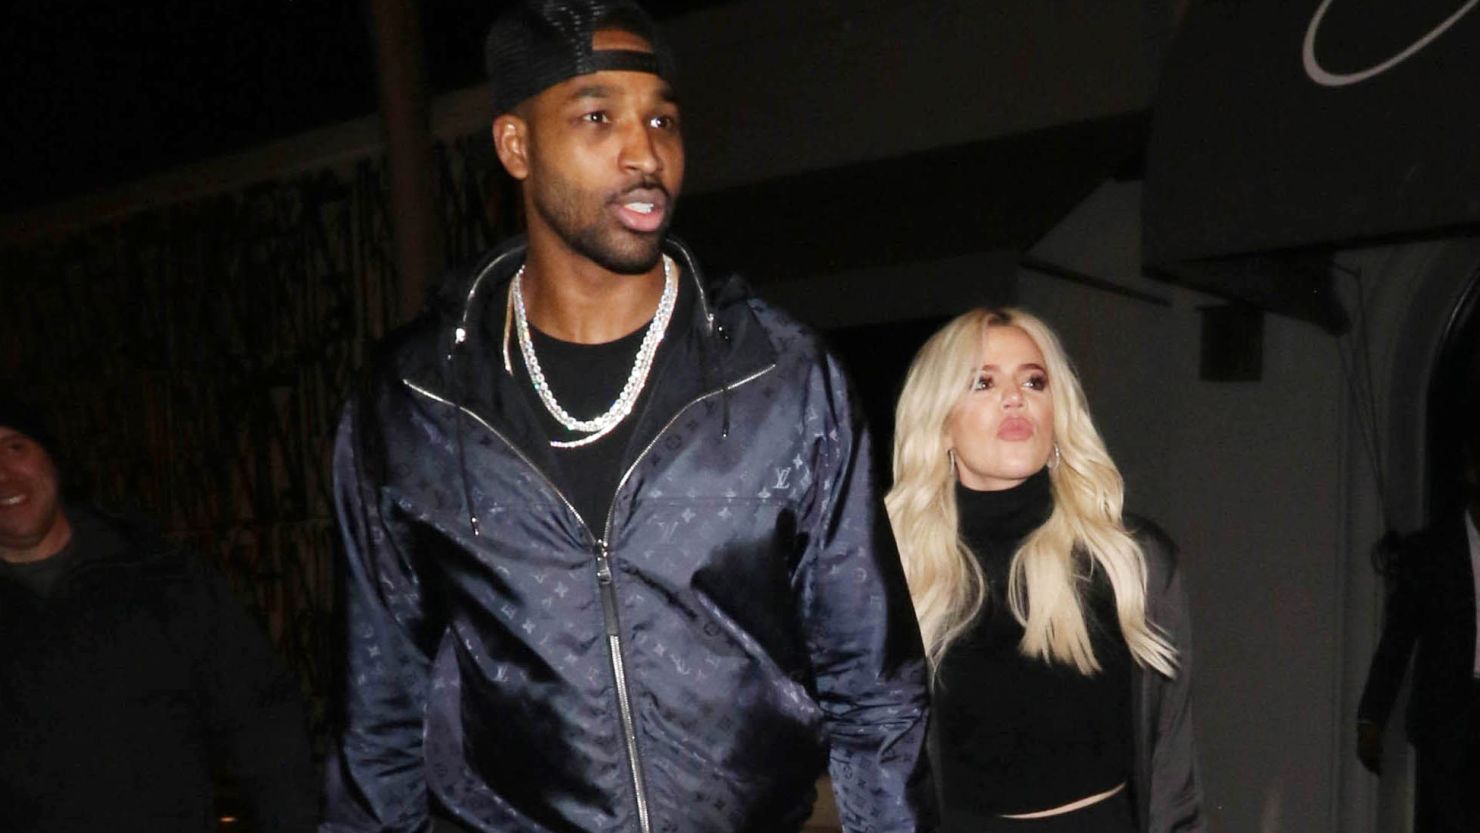 Khloe Kardashian and Tristan Thompson, seen on January 13, 2019, in Los Angeles.